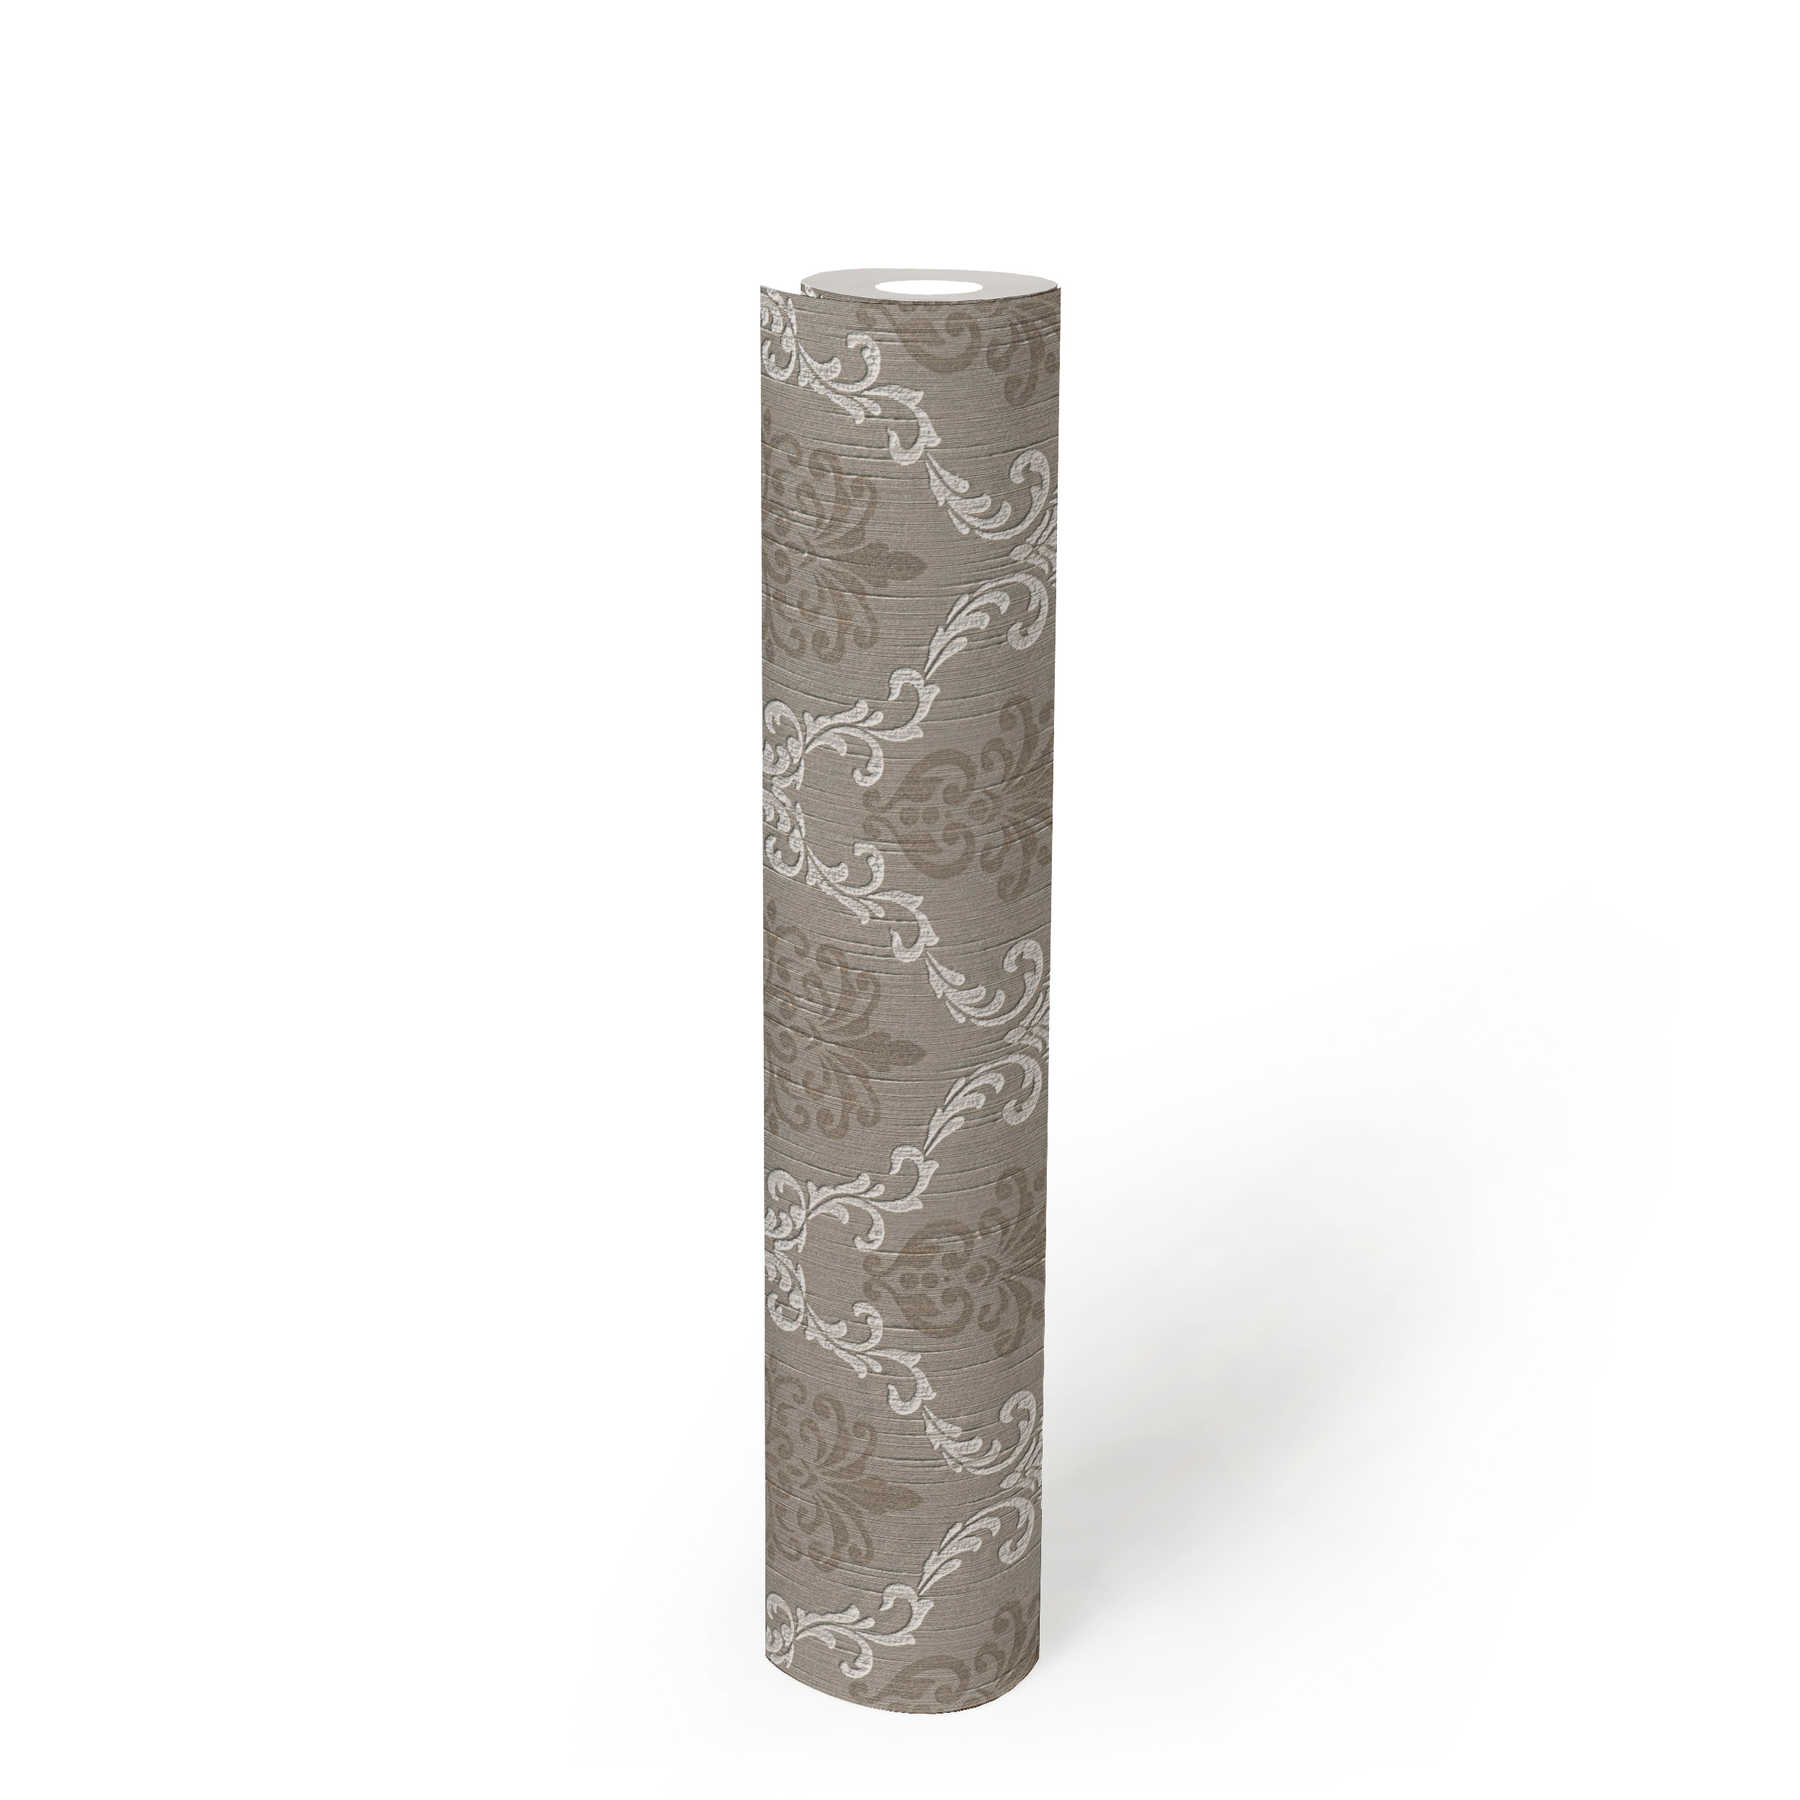             Non-woven wallpaper with ornament design in colonial style - beige, grey
        